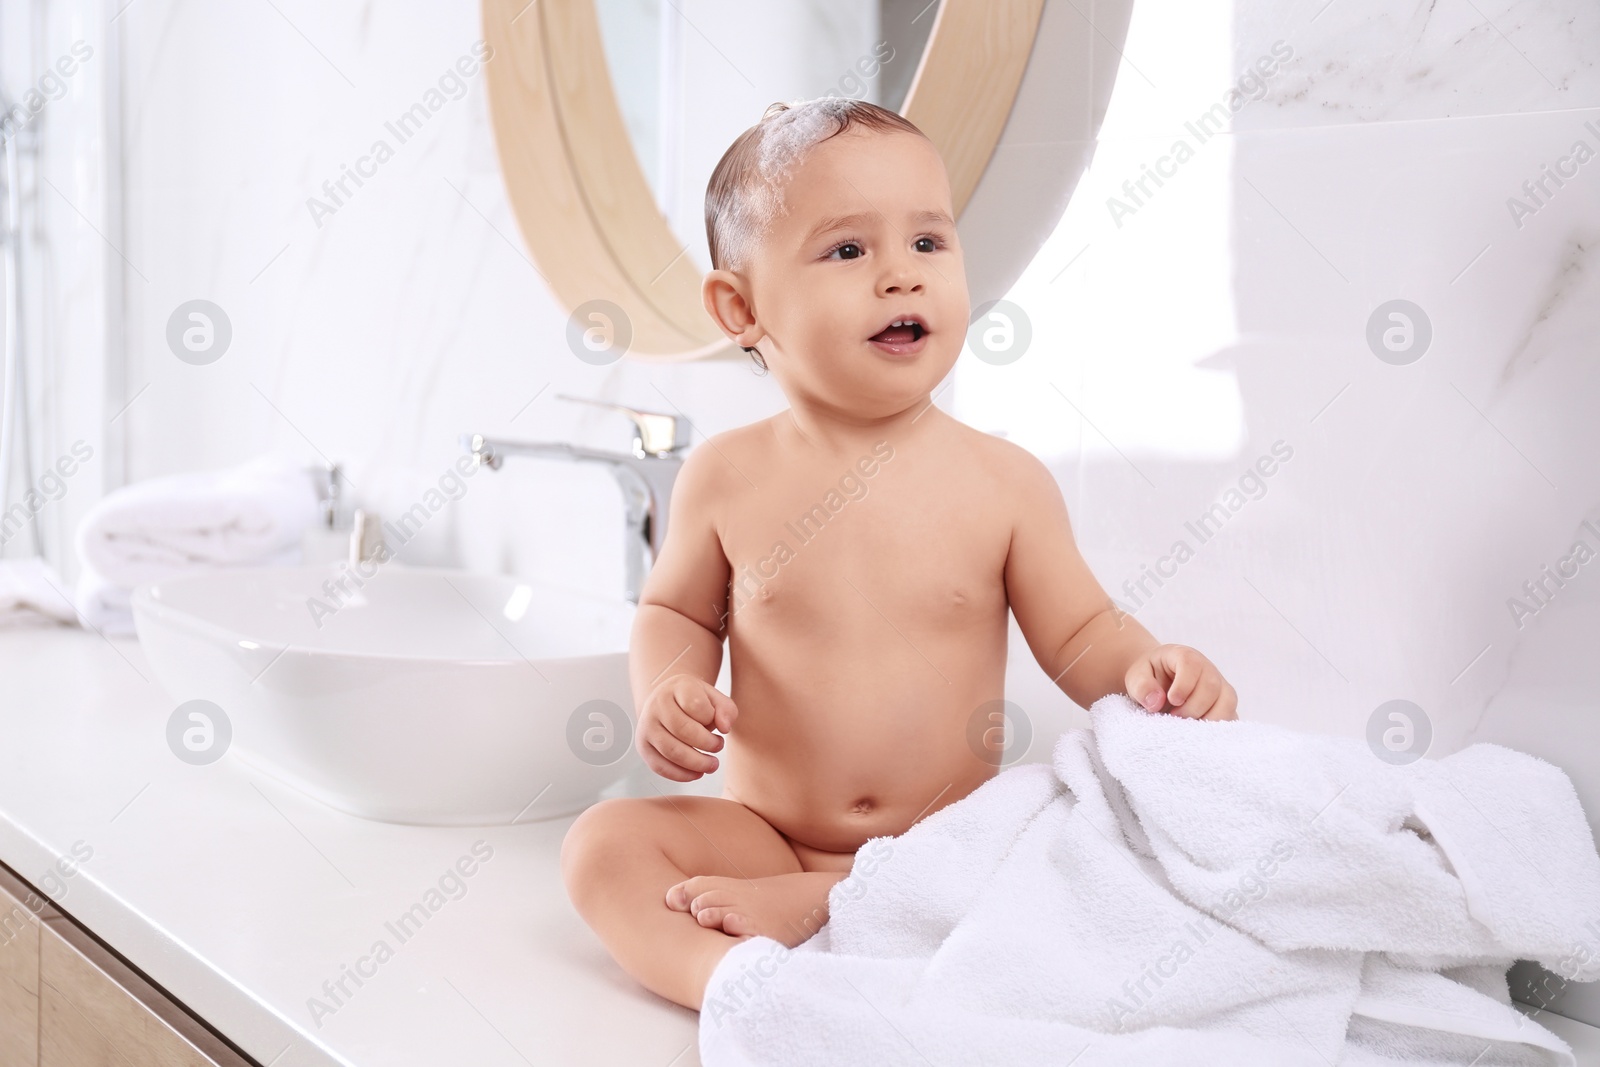 Photo of Cute little baby sitting on countertop in bathroom